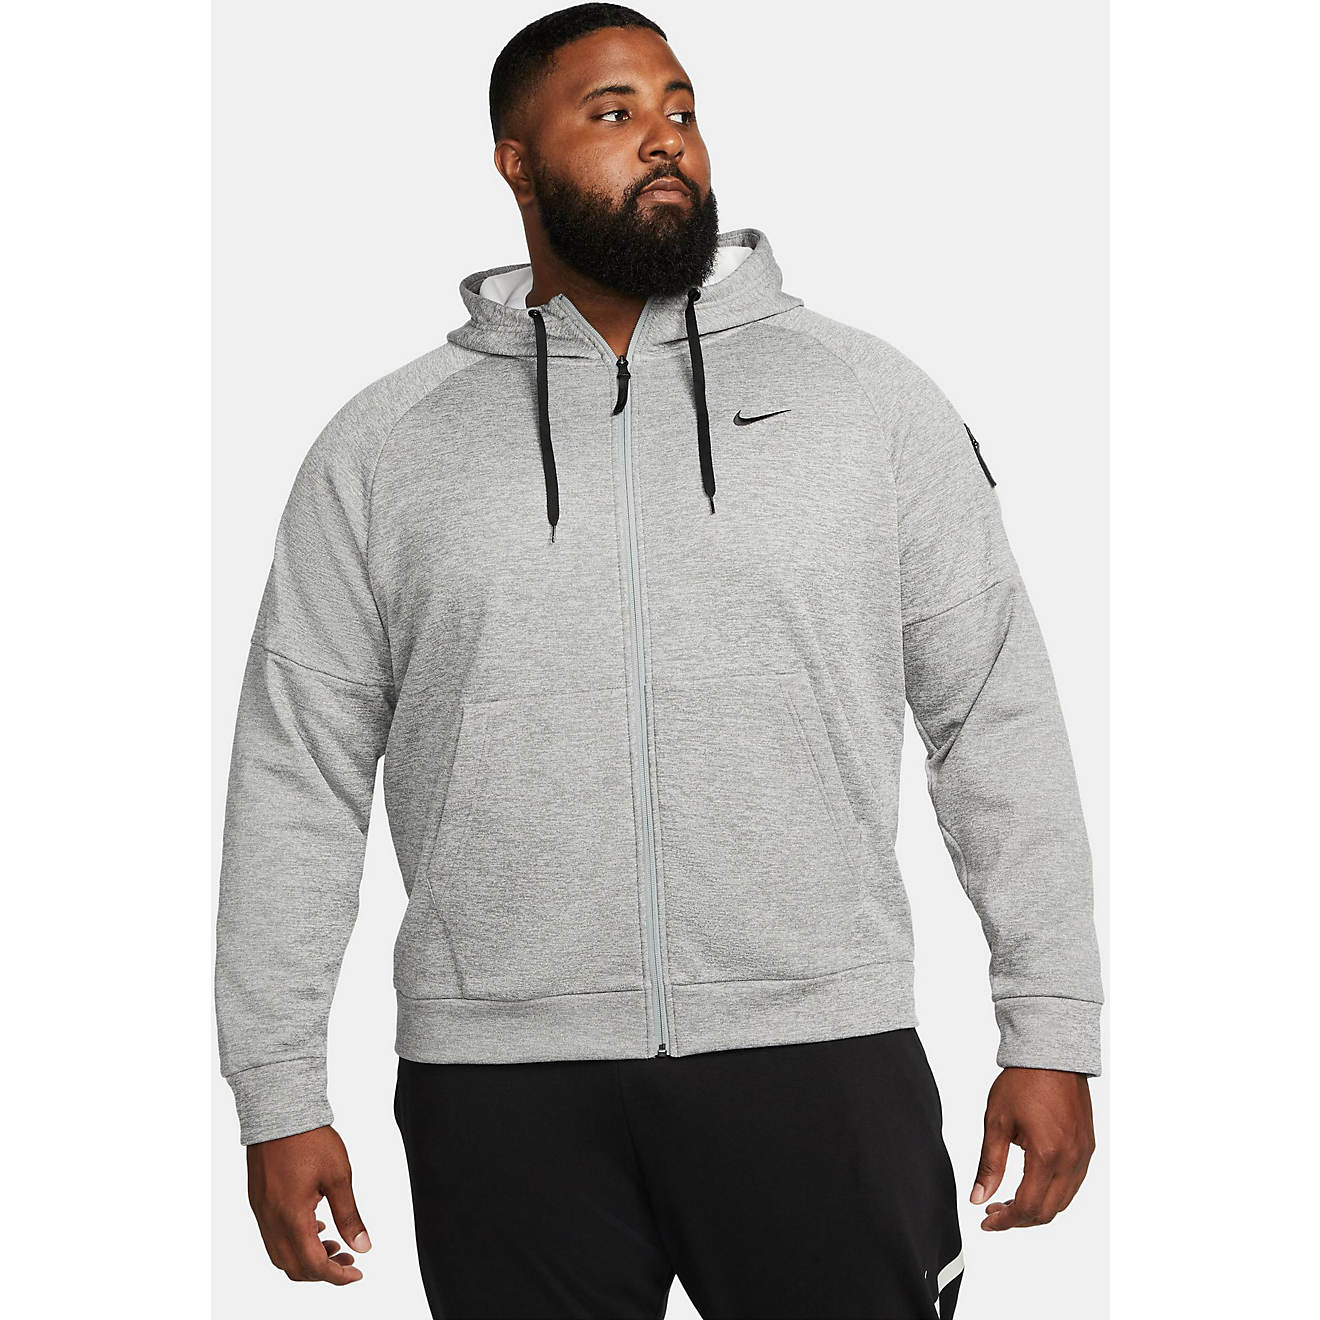 Men's Therma-FIT Full-Zip Hoodie | Free Shipping at Academy